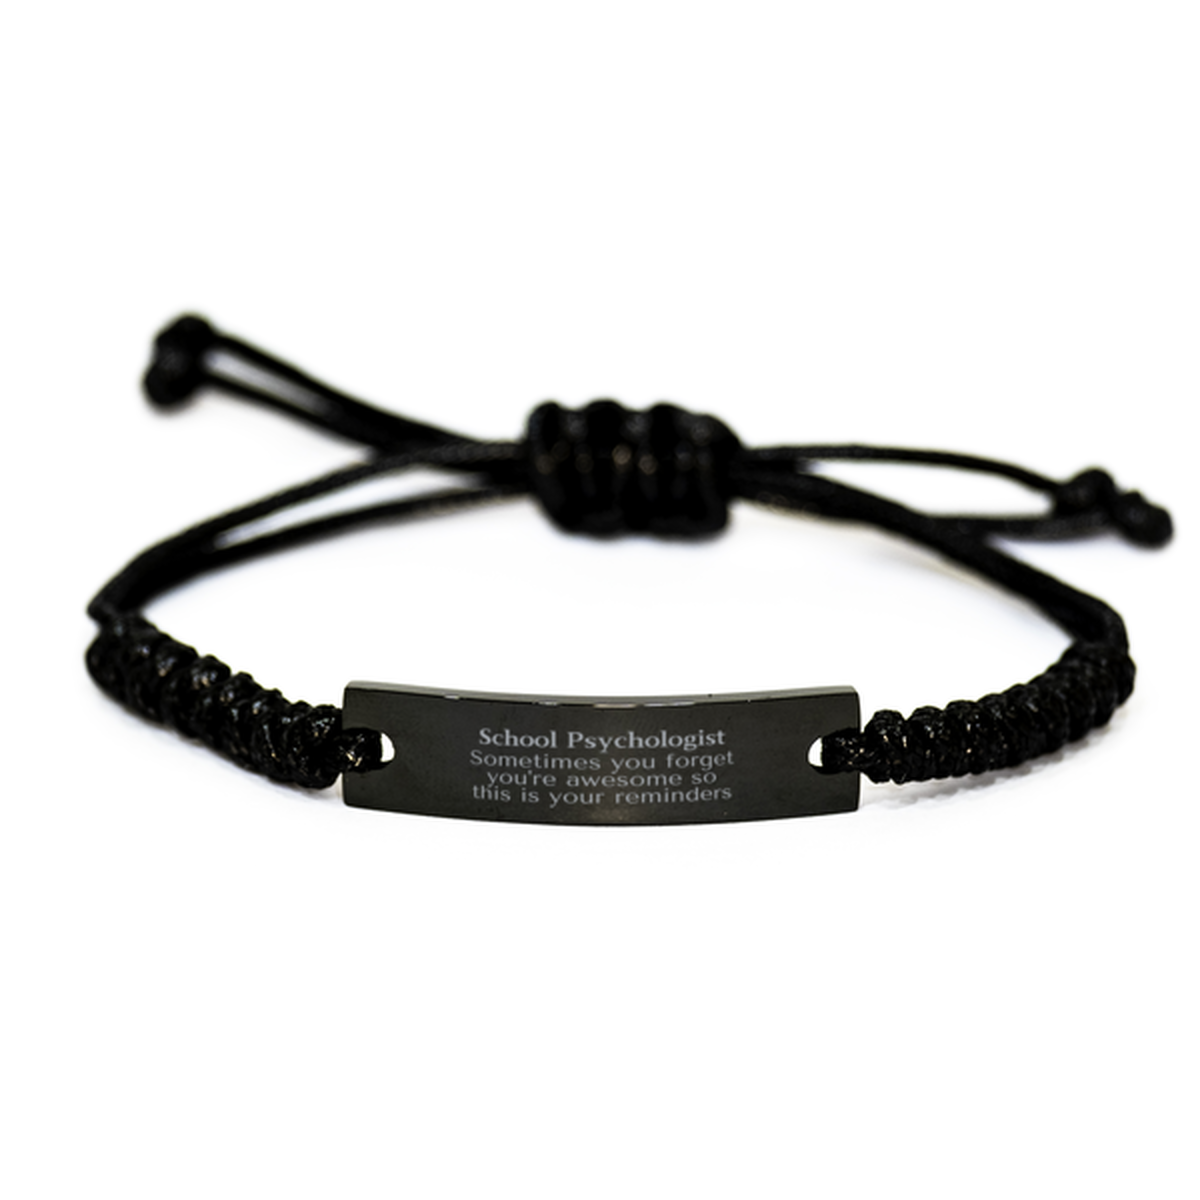 Sentimental School Psychologist Black Rope Bracelet, School Psychologist Sometimes you forget you're awesome so this is your reminders, Graduation Christmas Birthday Gifts for School Psychologist, Men, Women, Coworkers